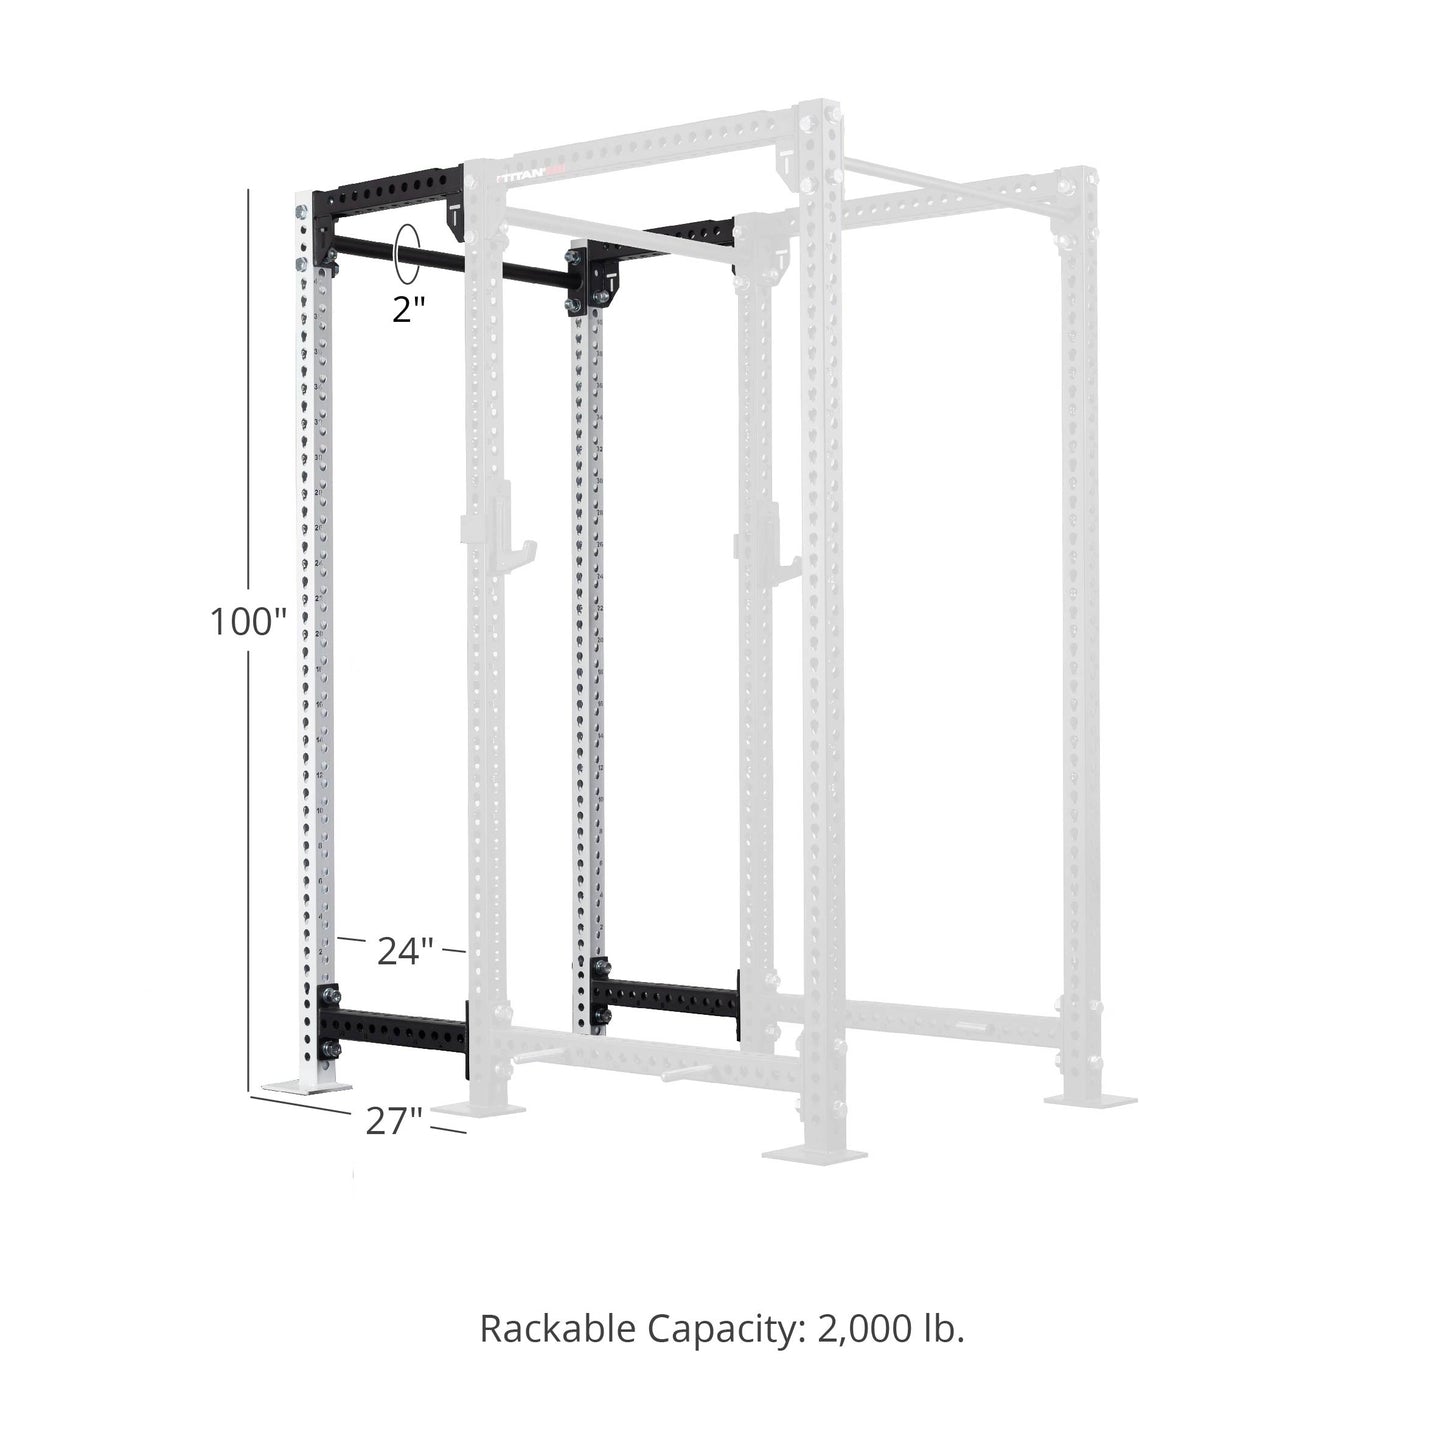 TITAN Series 24" Extension Kit - Extension Color: White - Extension Height: 100" - Crossmember: 2" Fat Pull-Up Bar | White / 100" / 2" Fat Pull-Up Bar - view 234